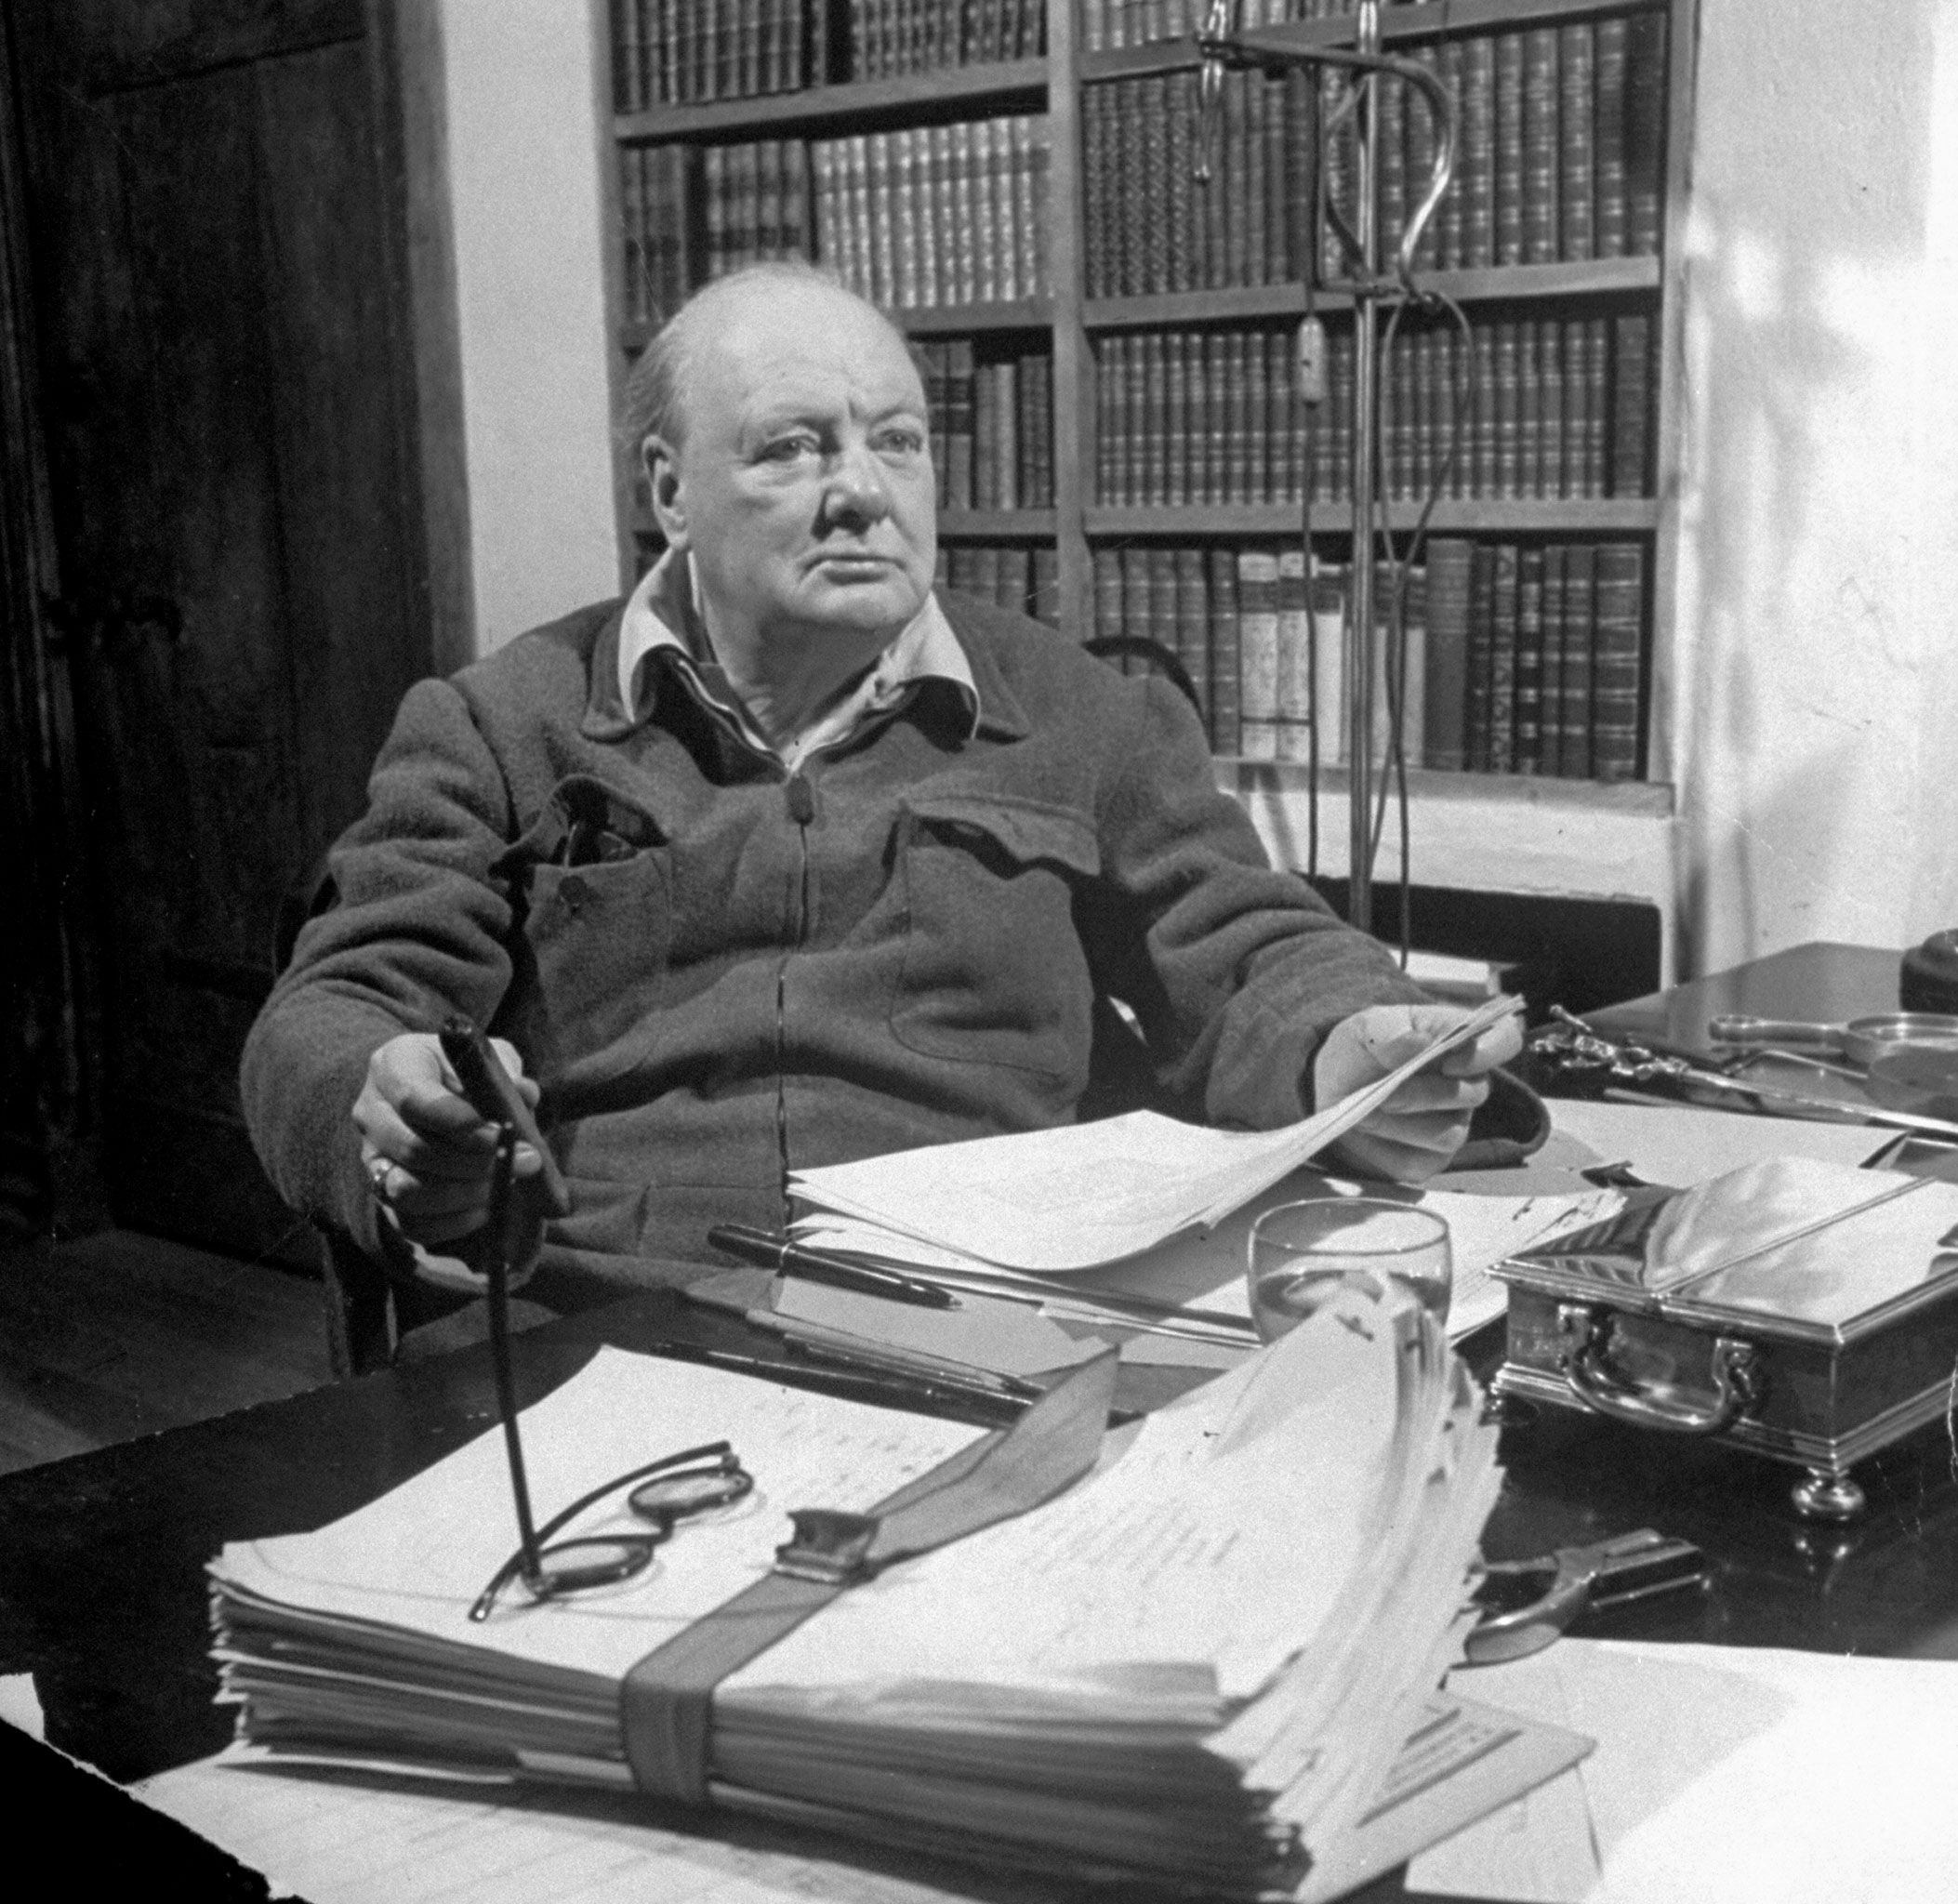 Winston Churchill at his desk working on his memoirs, March 1947